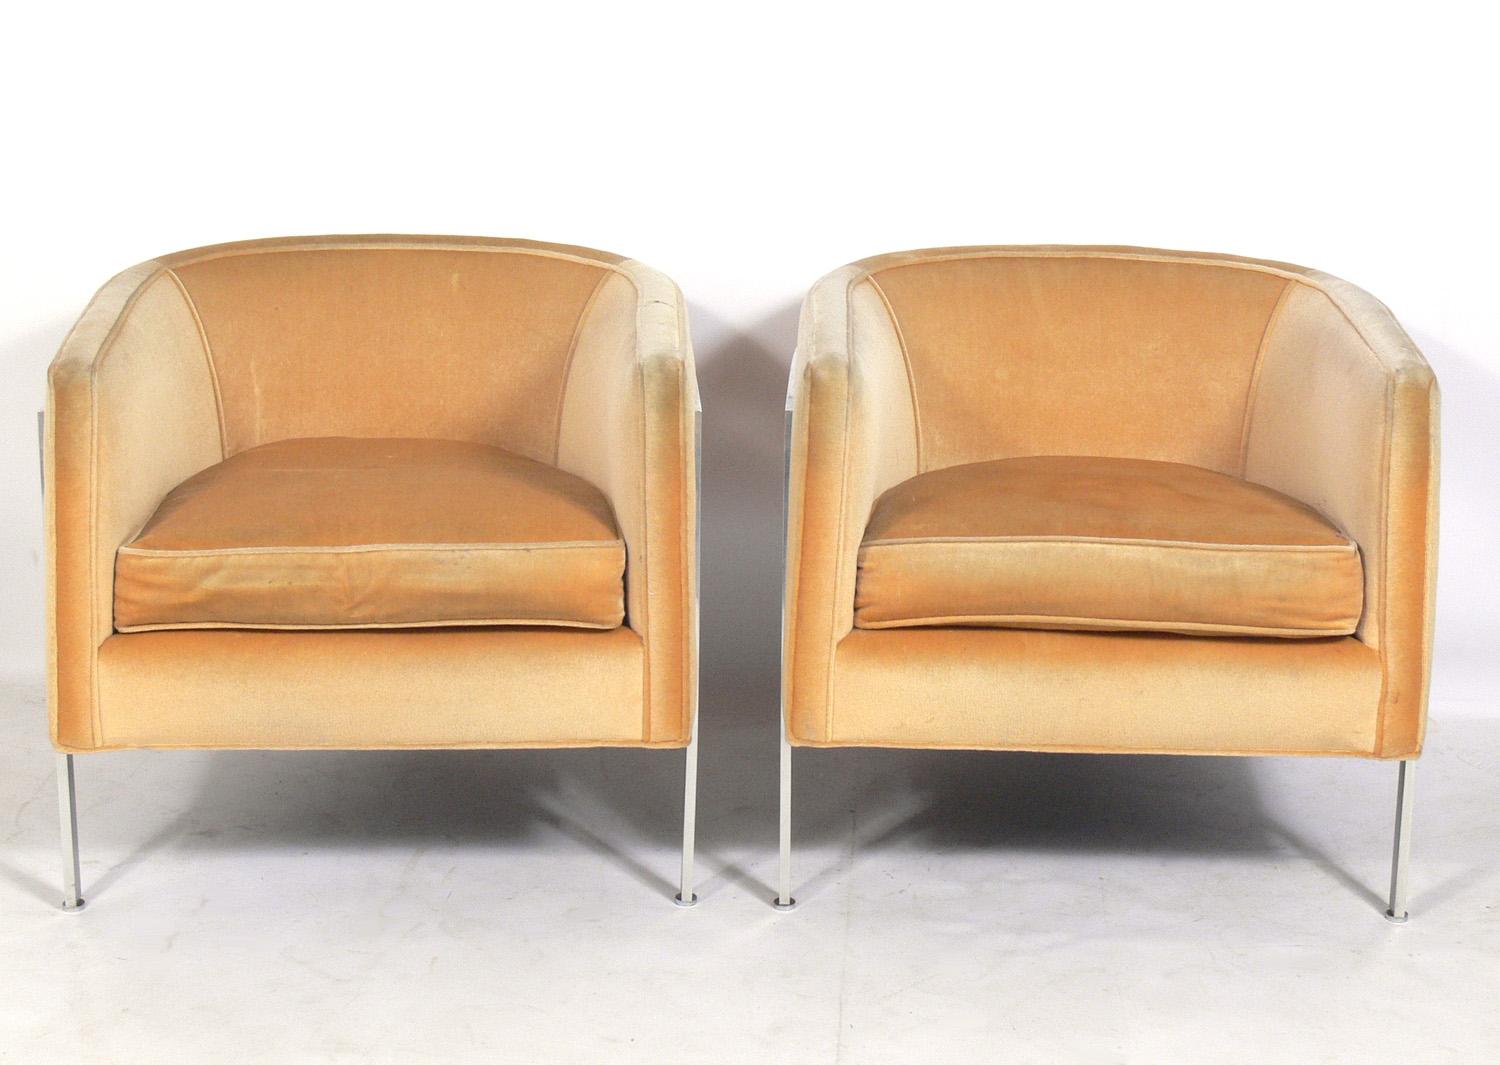 Mid-Century Modern Pair of Curvaceous Tub Chairs by Harvey Probber